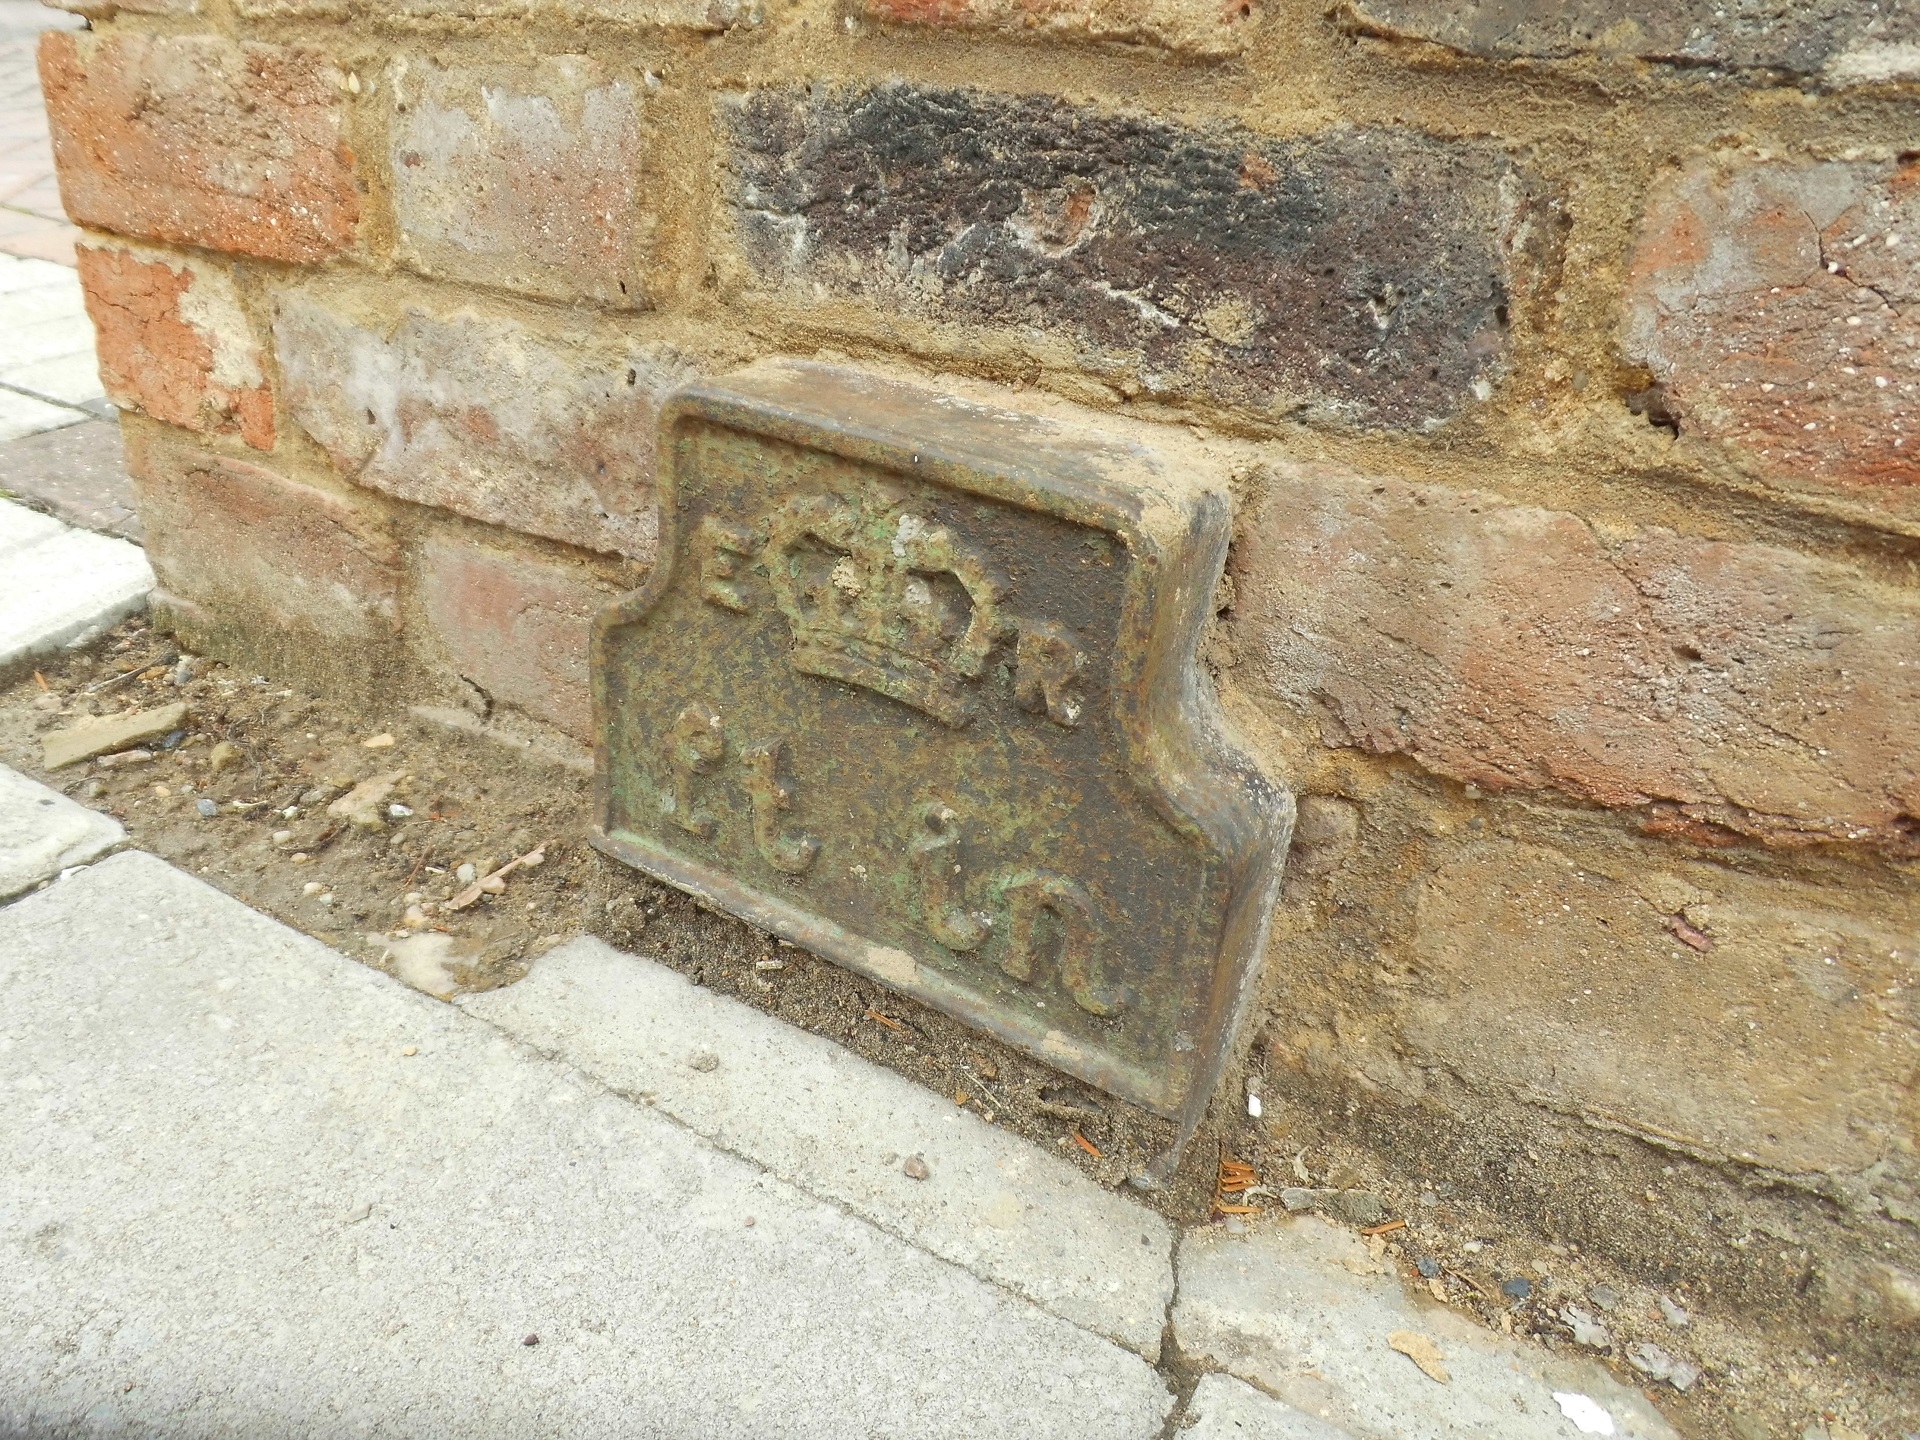 Telegraph cable marker post at 40 Hempstead Road, Watford by Derek Pattenson 